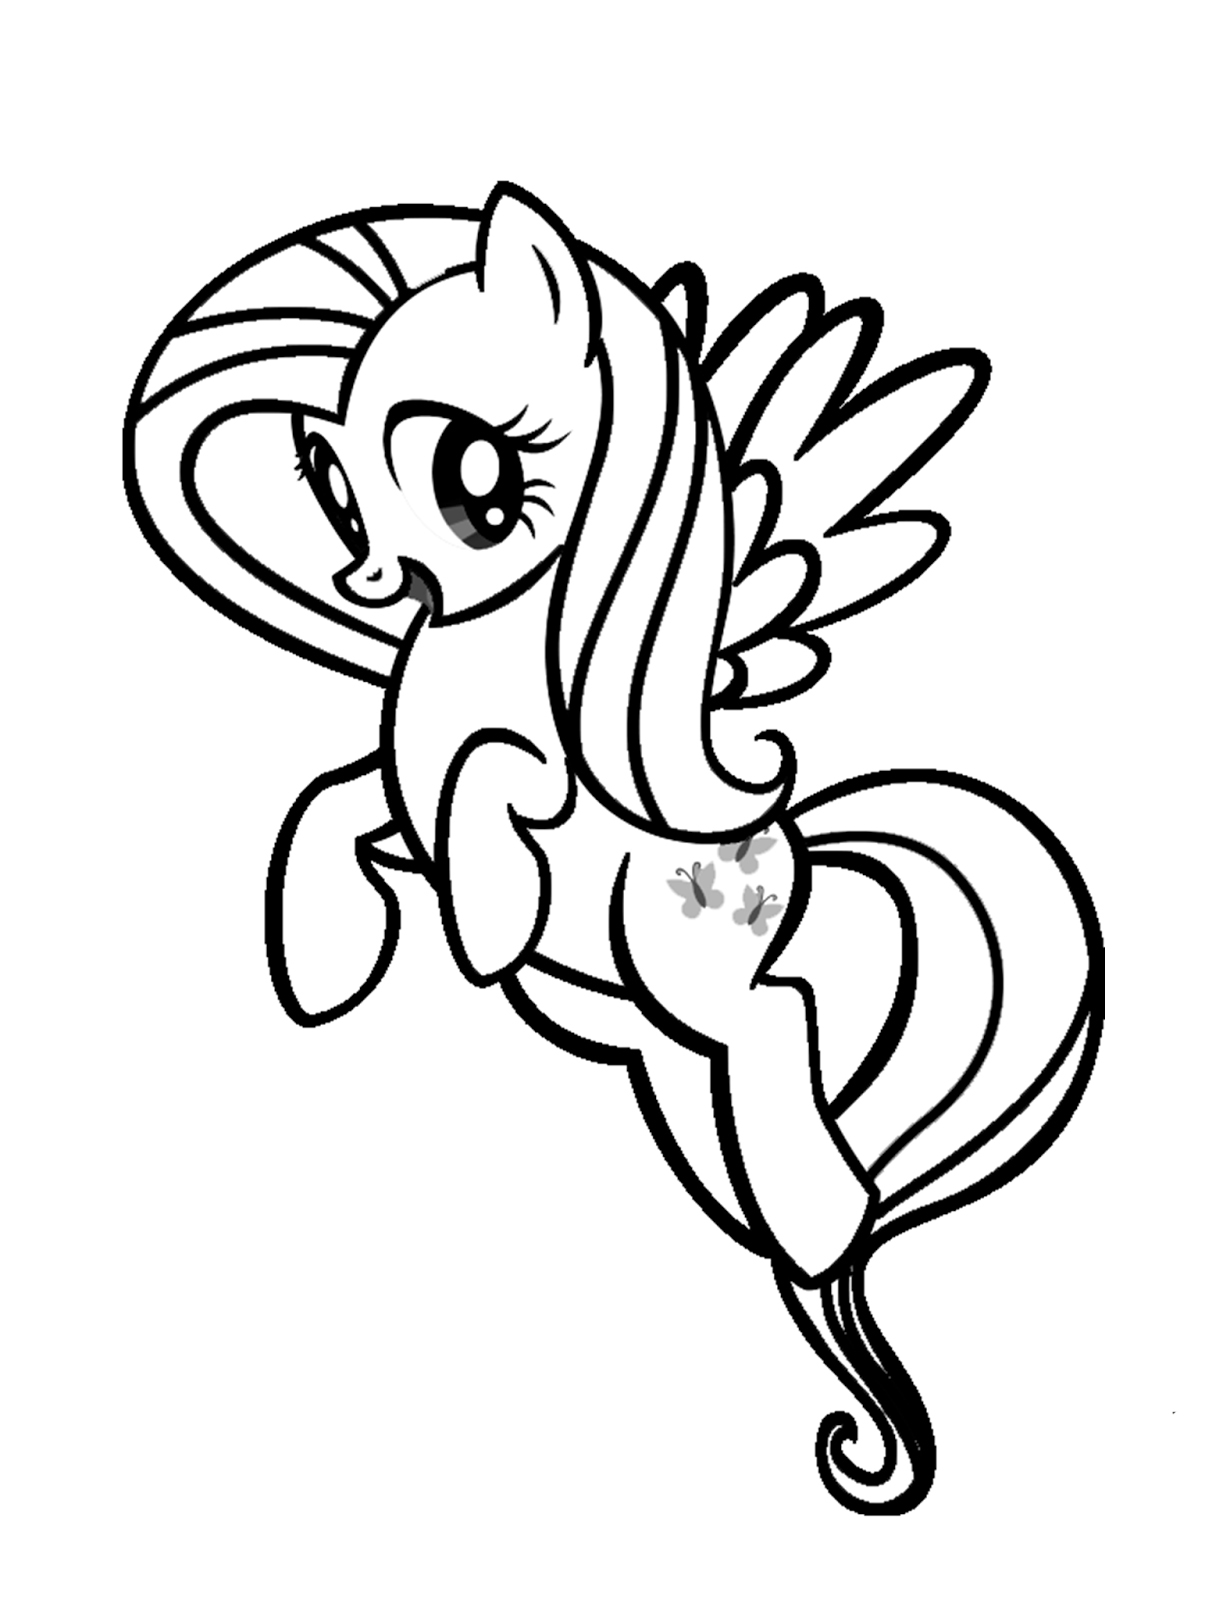 Coloring books, Cartoon coloring pages, My little pony coloring